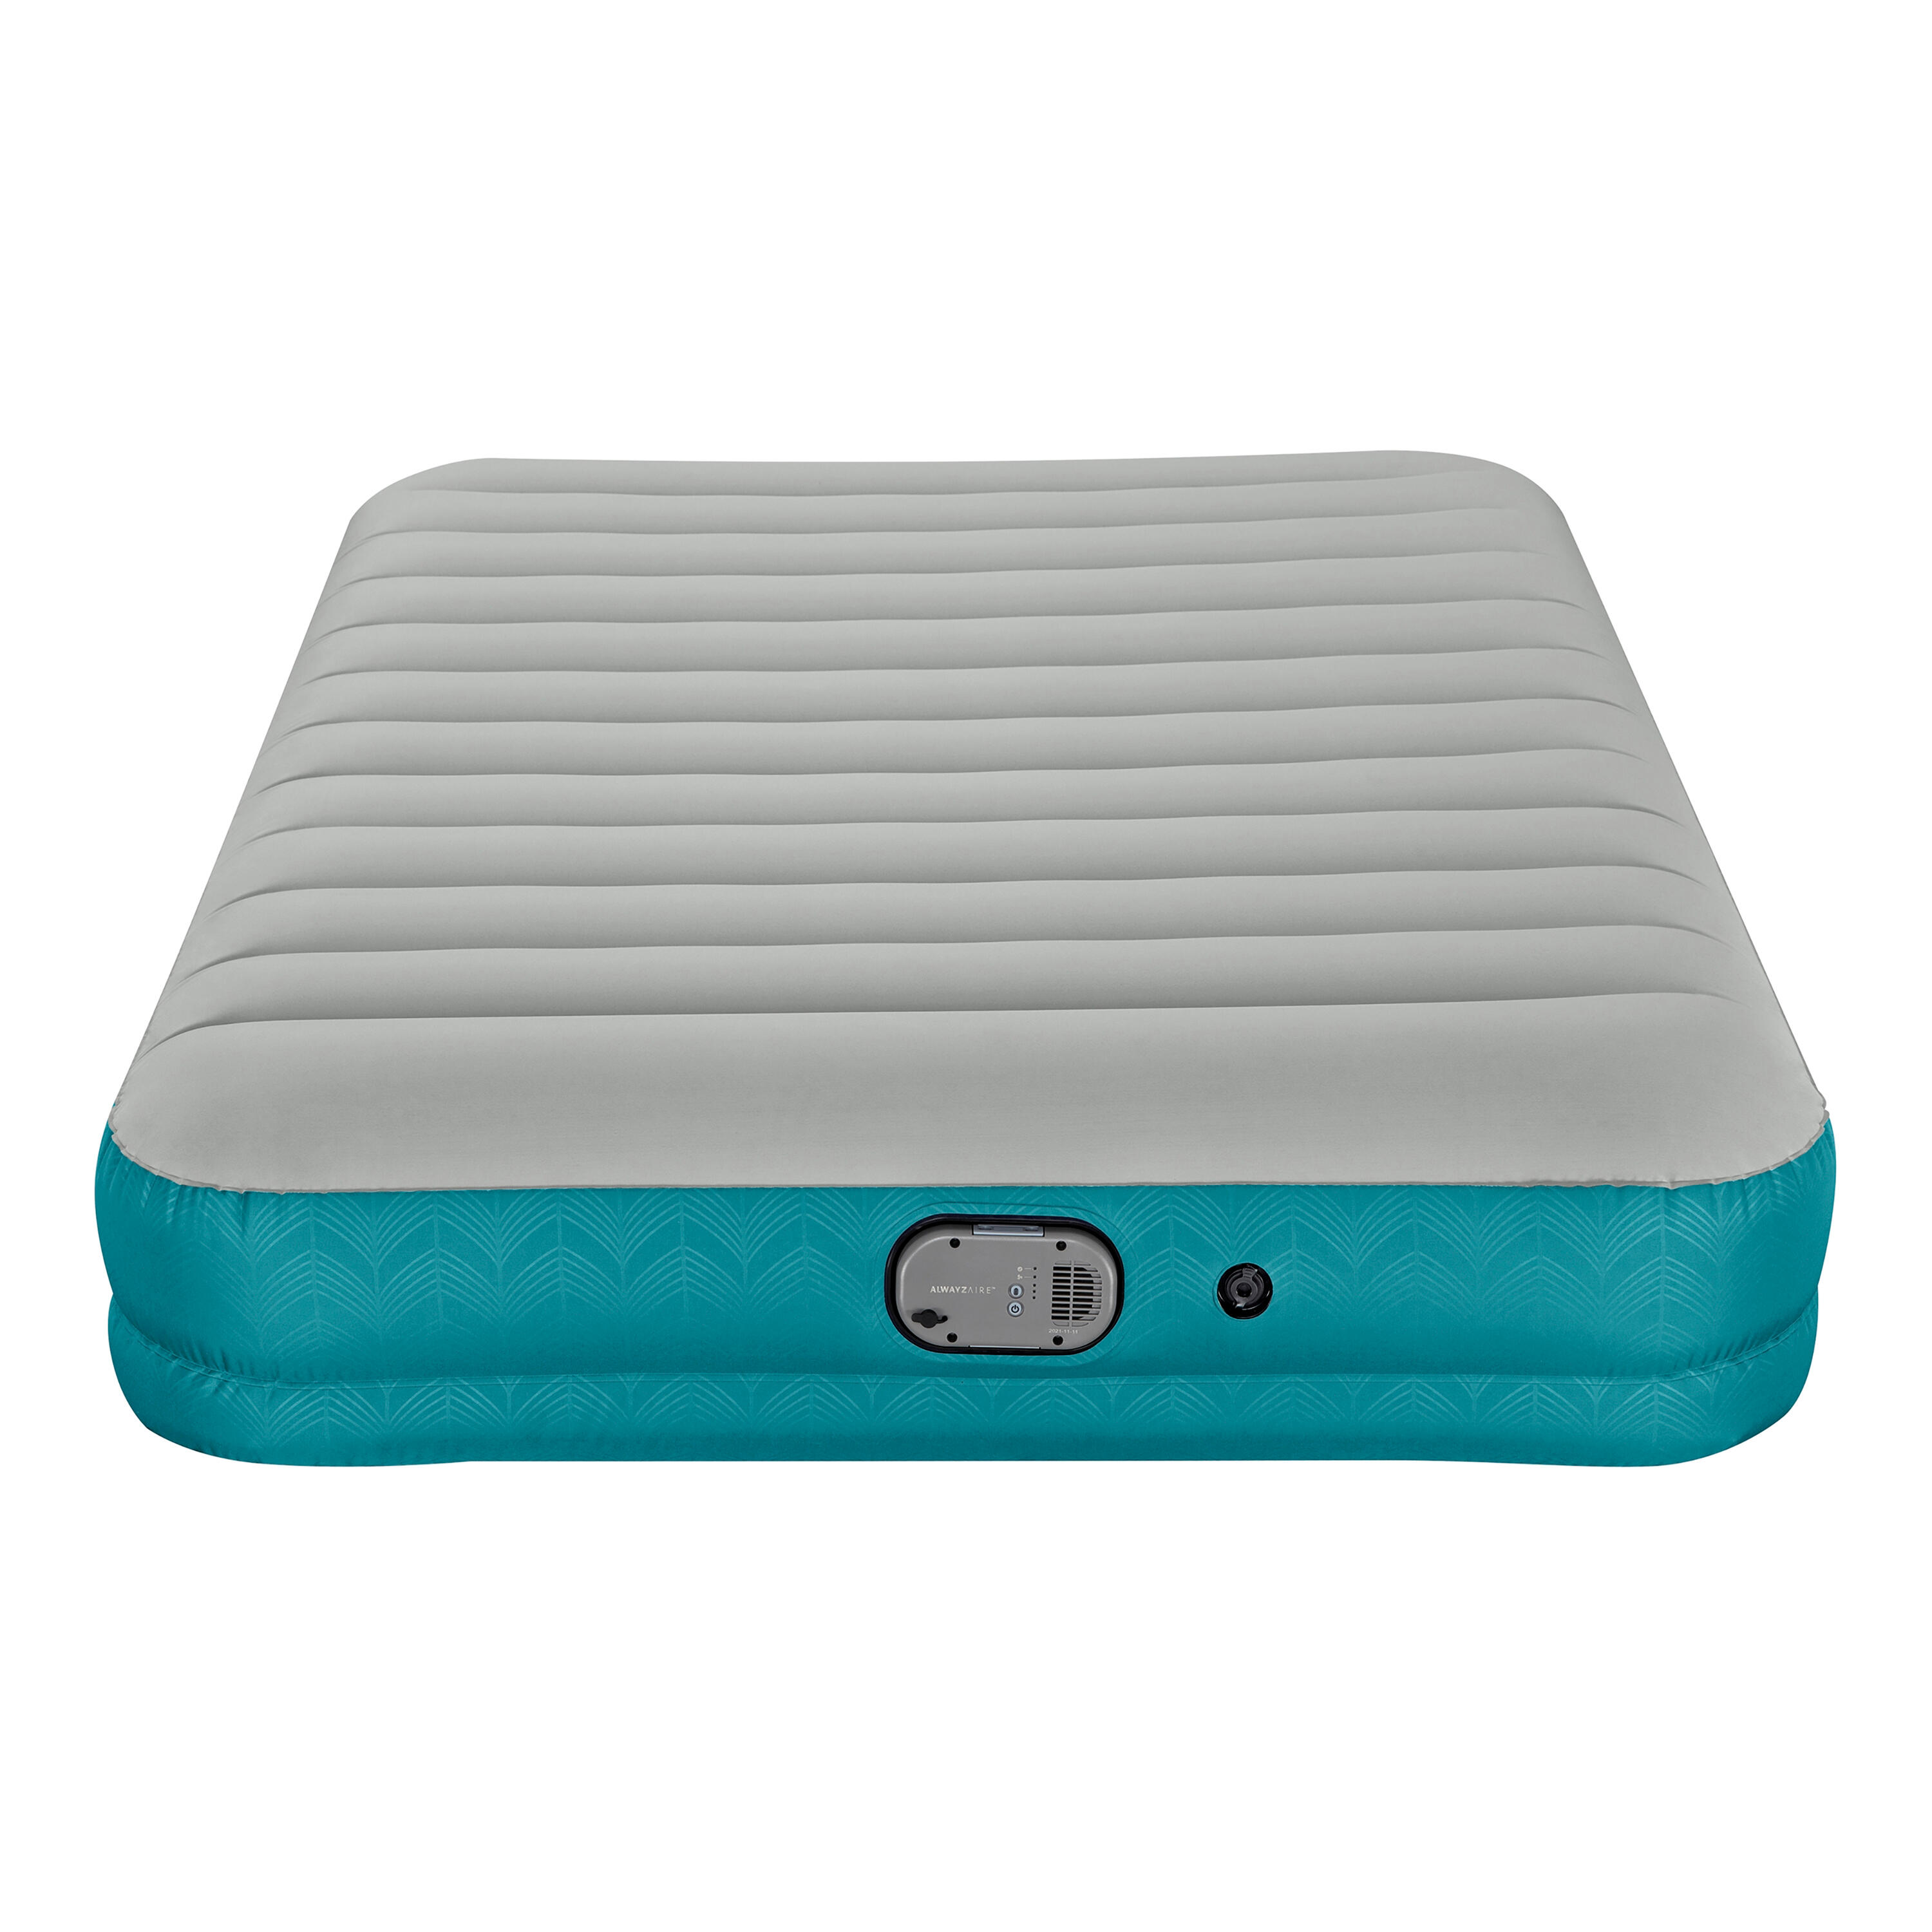 CAMPING MATTRESS WITH BUILT-IN ELECTRIC PUMP - 2 PERSON 4/11